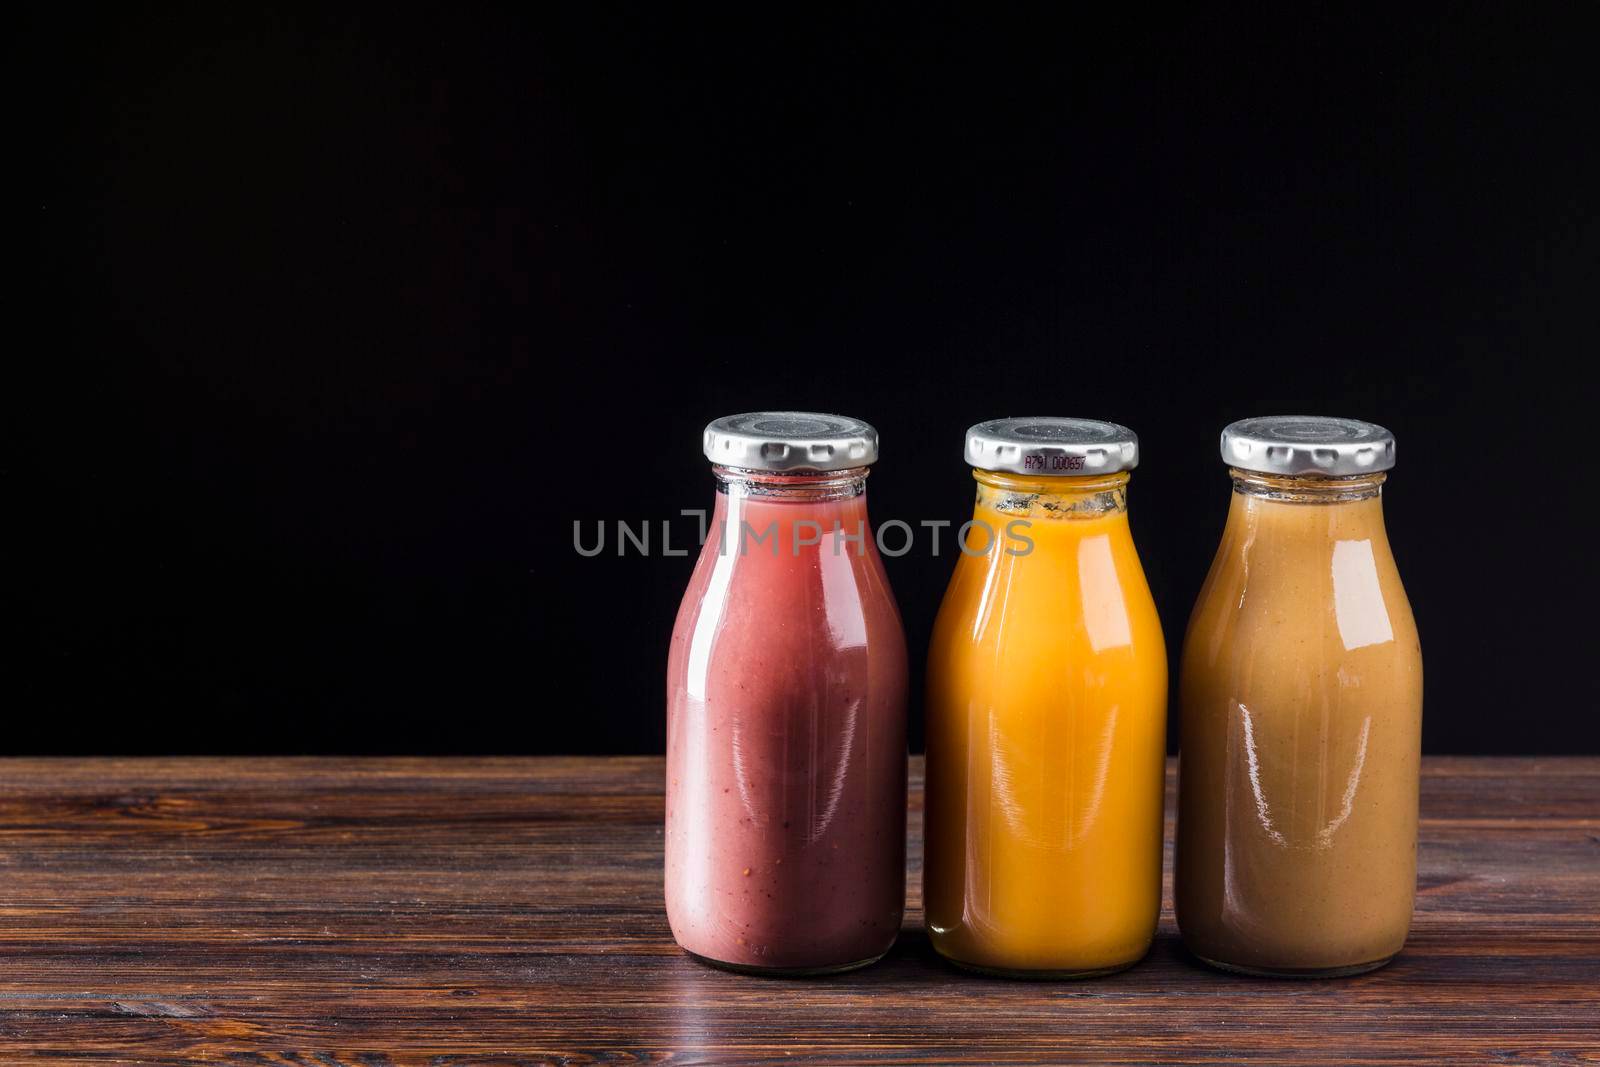 smoothie bottles wooden surface by Zahard